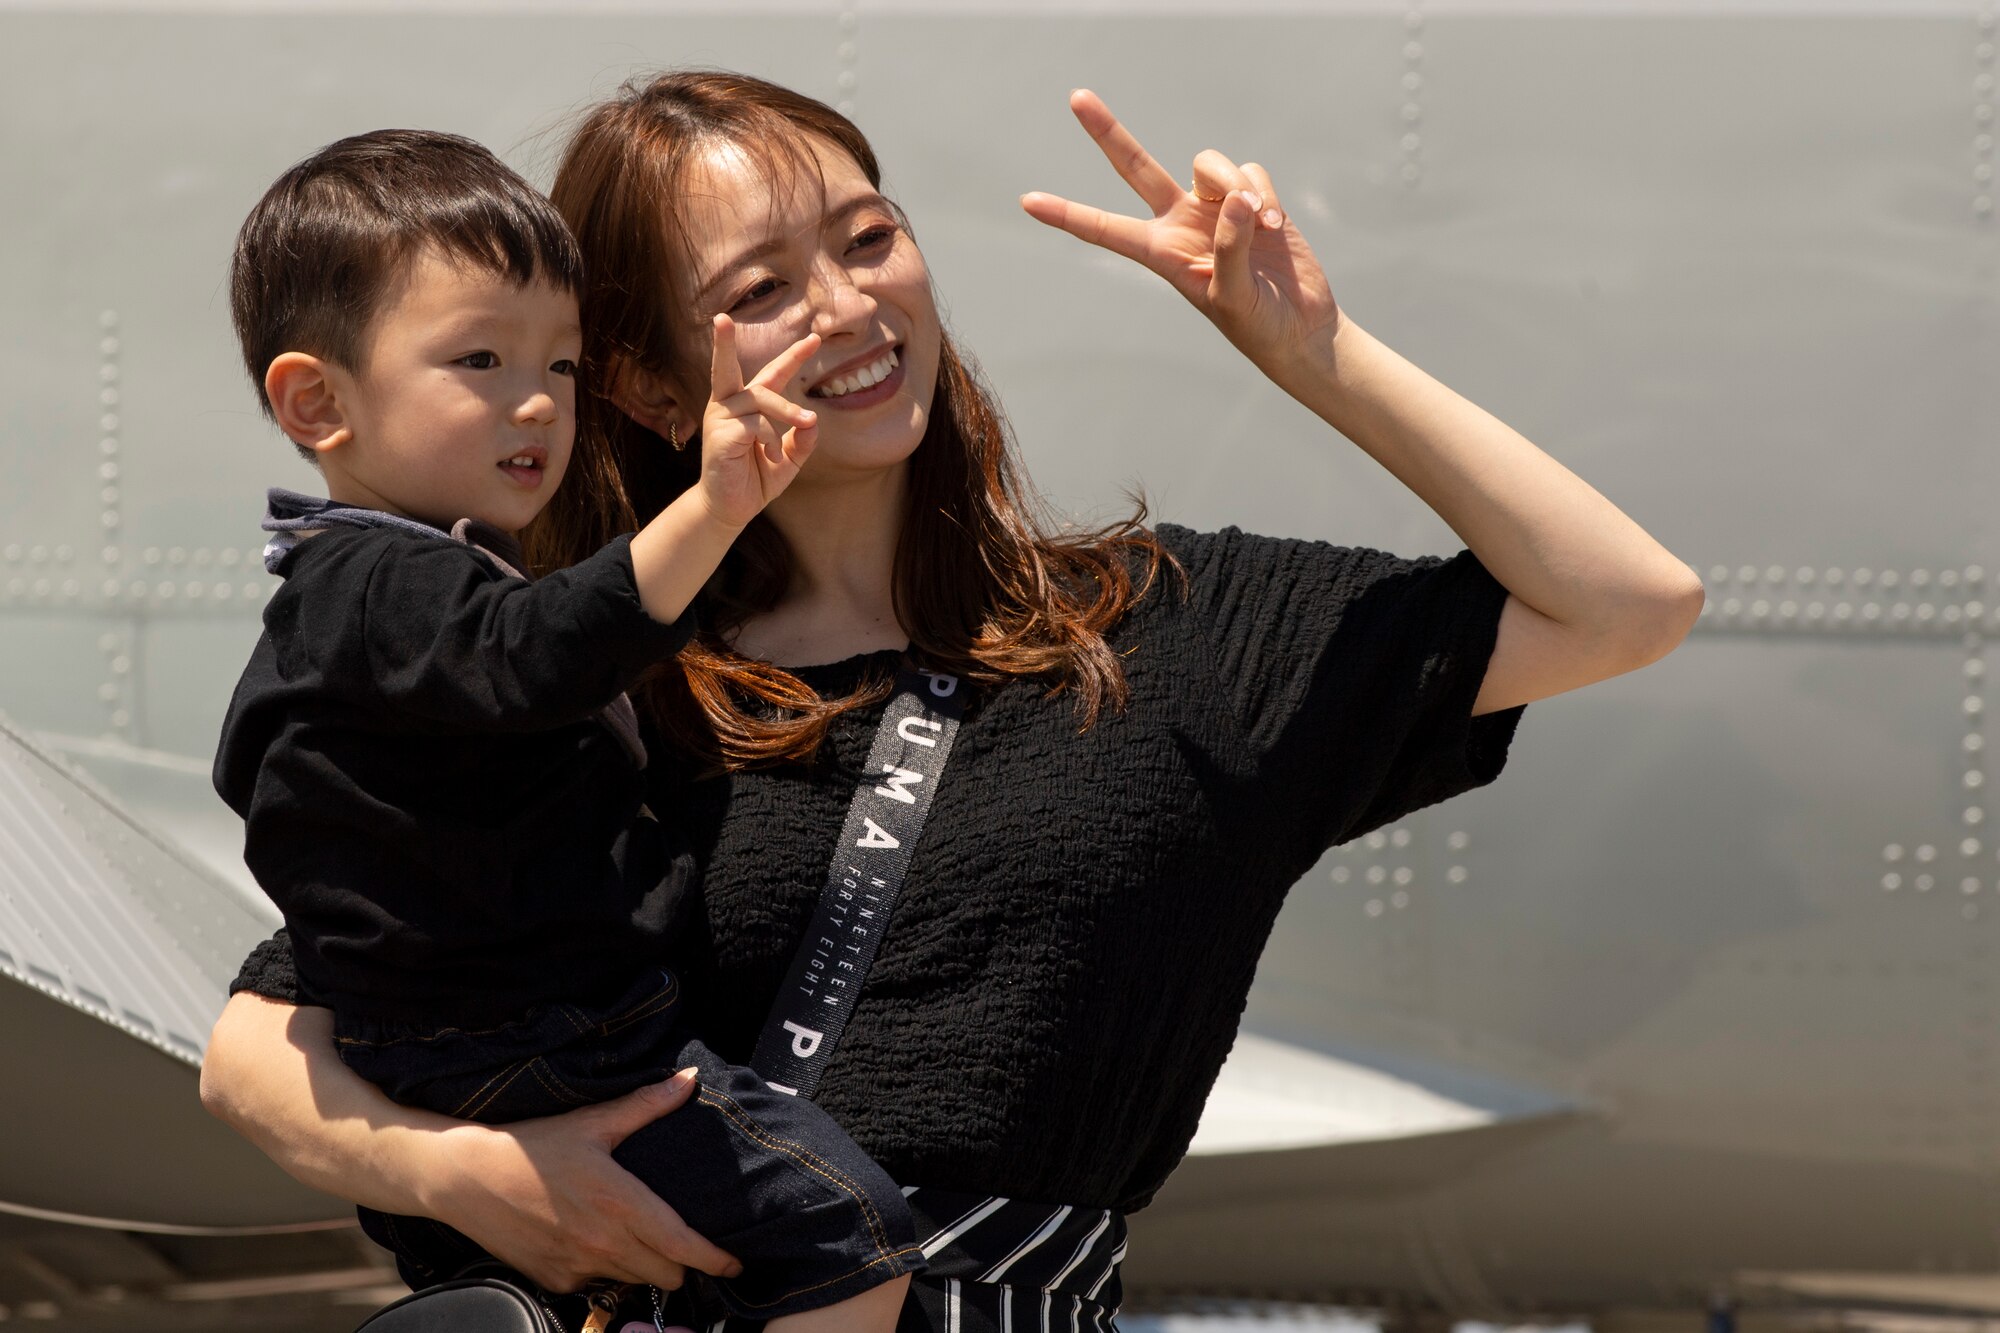 A festival attendee and her son pose for a picture in front of a C-12 Huron belonging to the 459th Airlift Squadron, during the Friendship Festival 2022, at Yokota Air Base, Japan, May 22, 2022. The two-day festival was an opportunity for visitors to learn more about the U.S. and Japan bilateral partnership, while strengthening the bonds between Yokota and the local communities. Yokota was able to host the event with the support of Japanese Self-Defense Force, sister services and the local community. (U.S. Air Force photo by Staff Sgt. Ryan Lackey)